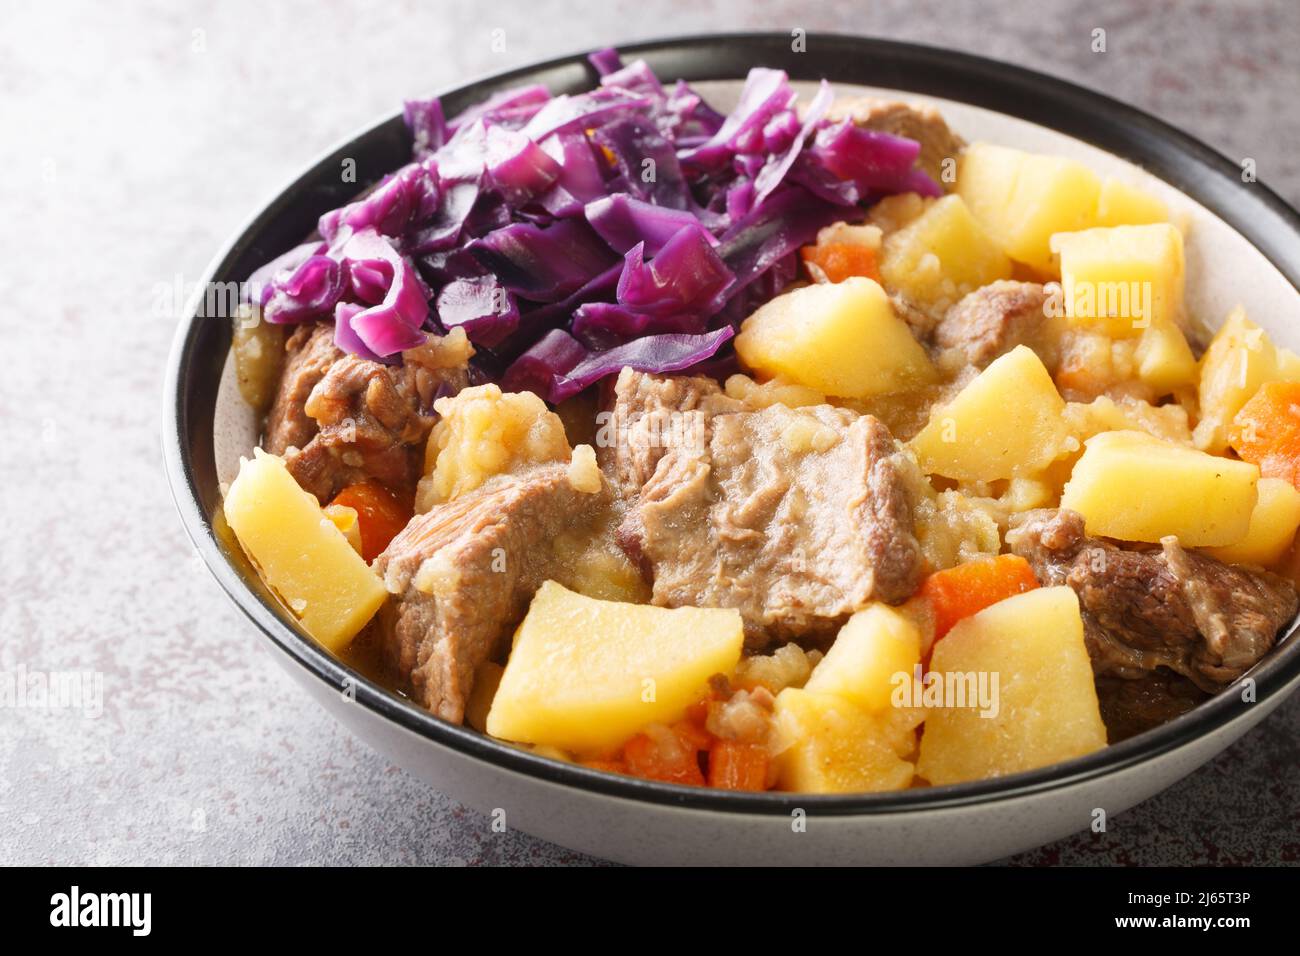 Perfect scouse with meat and vegetables stew from Liverpool close-up in a plate on the table. Horizontal Stock Photo